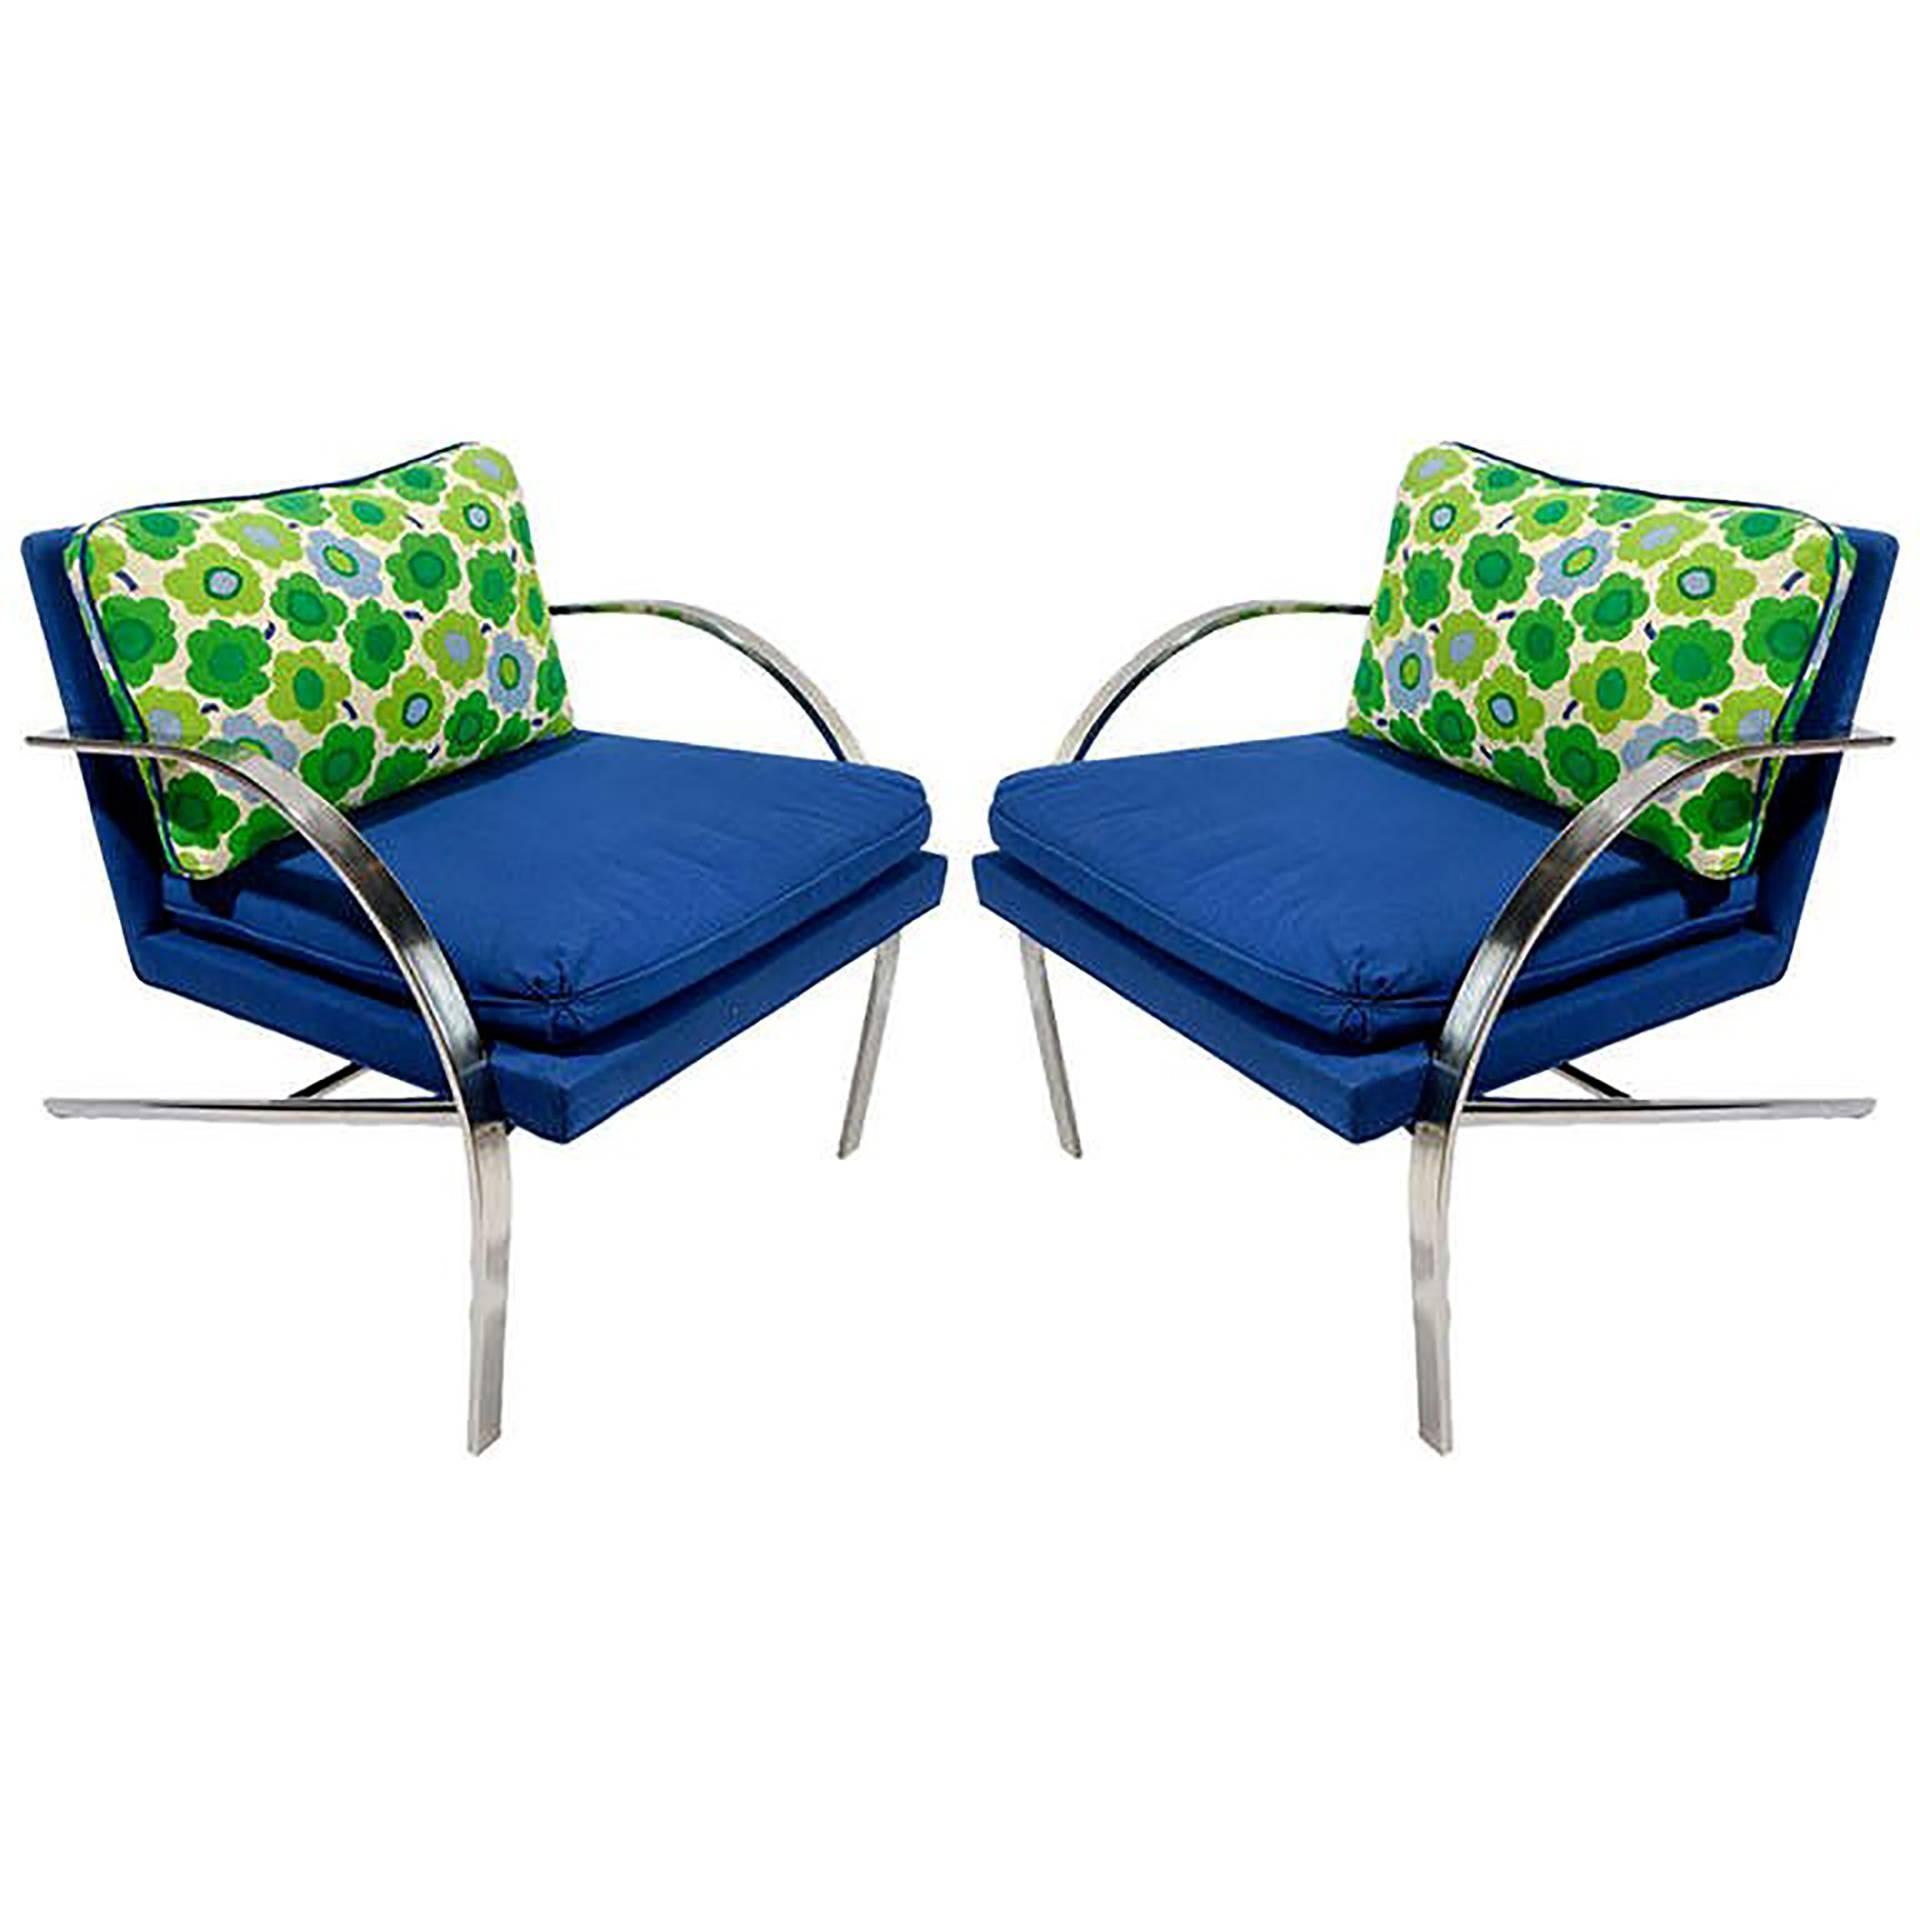 Pair of "Arco" Chairs in the Style of Paul Tuttle